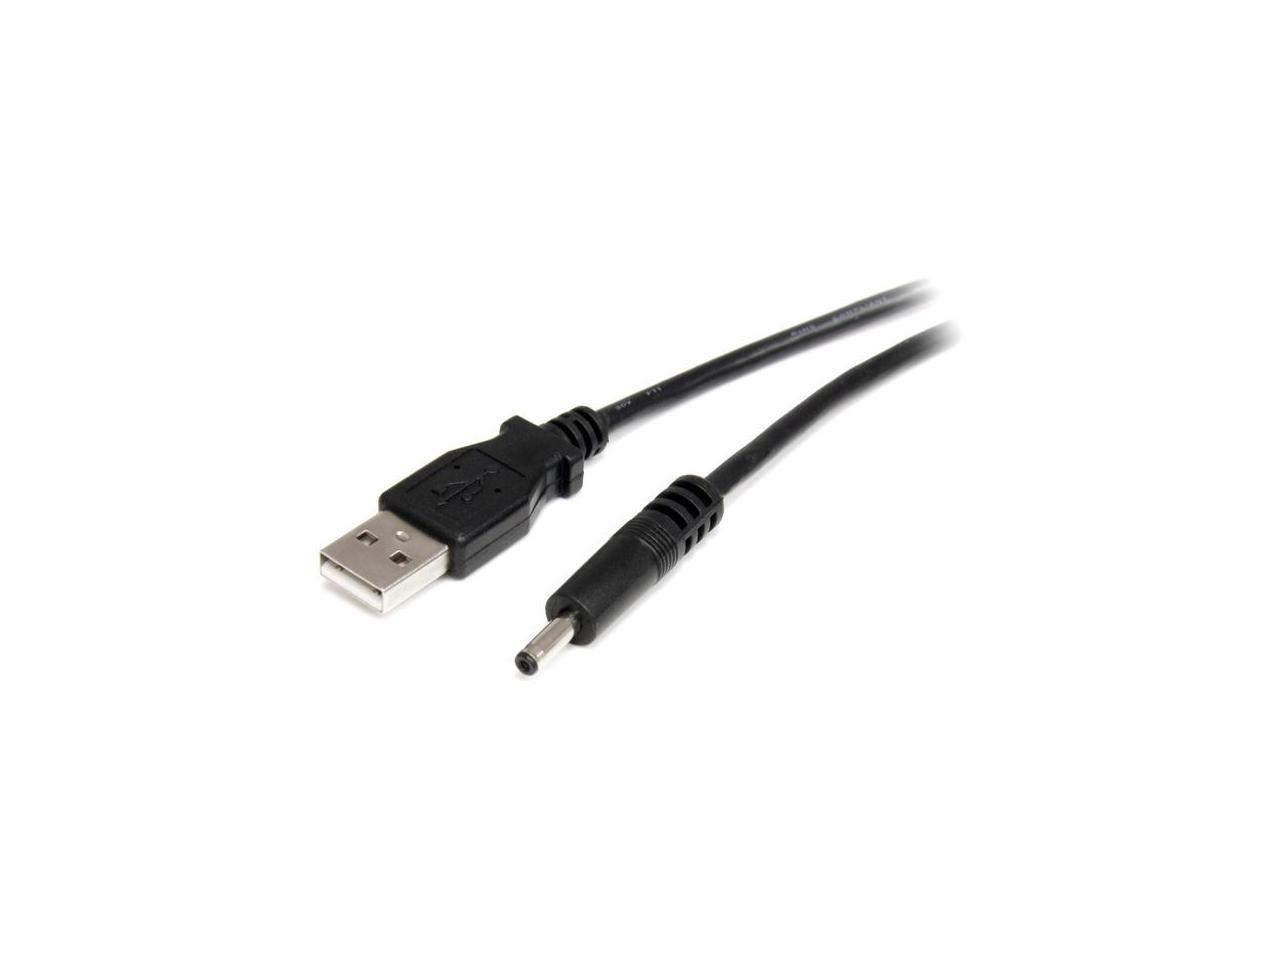 StarTech.com USB2TYPEH2M Black USB to 3.4mm power cable - Type H barrel - 2m - image 1 of 2